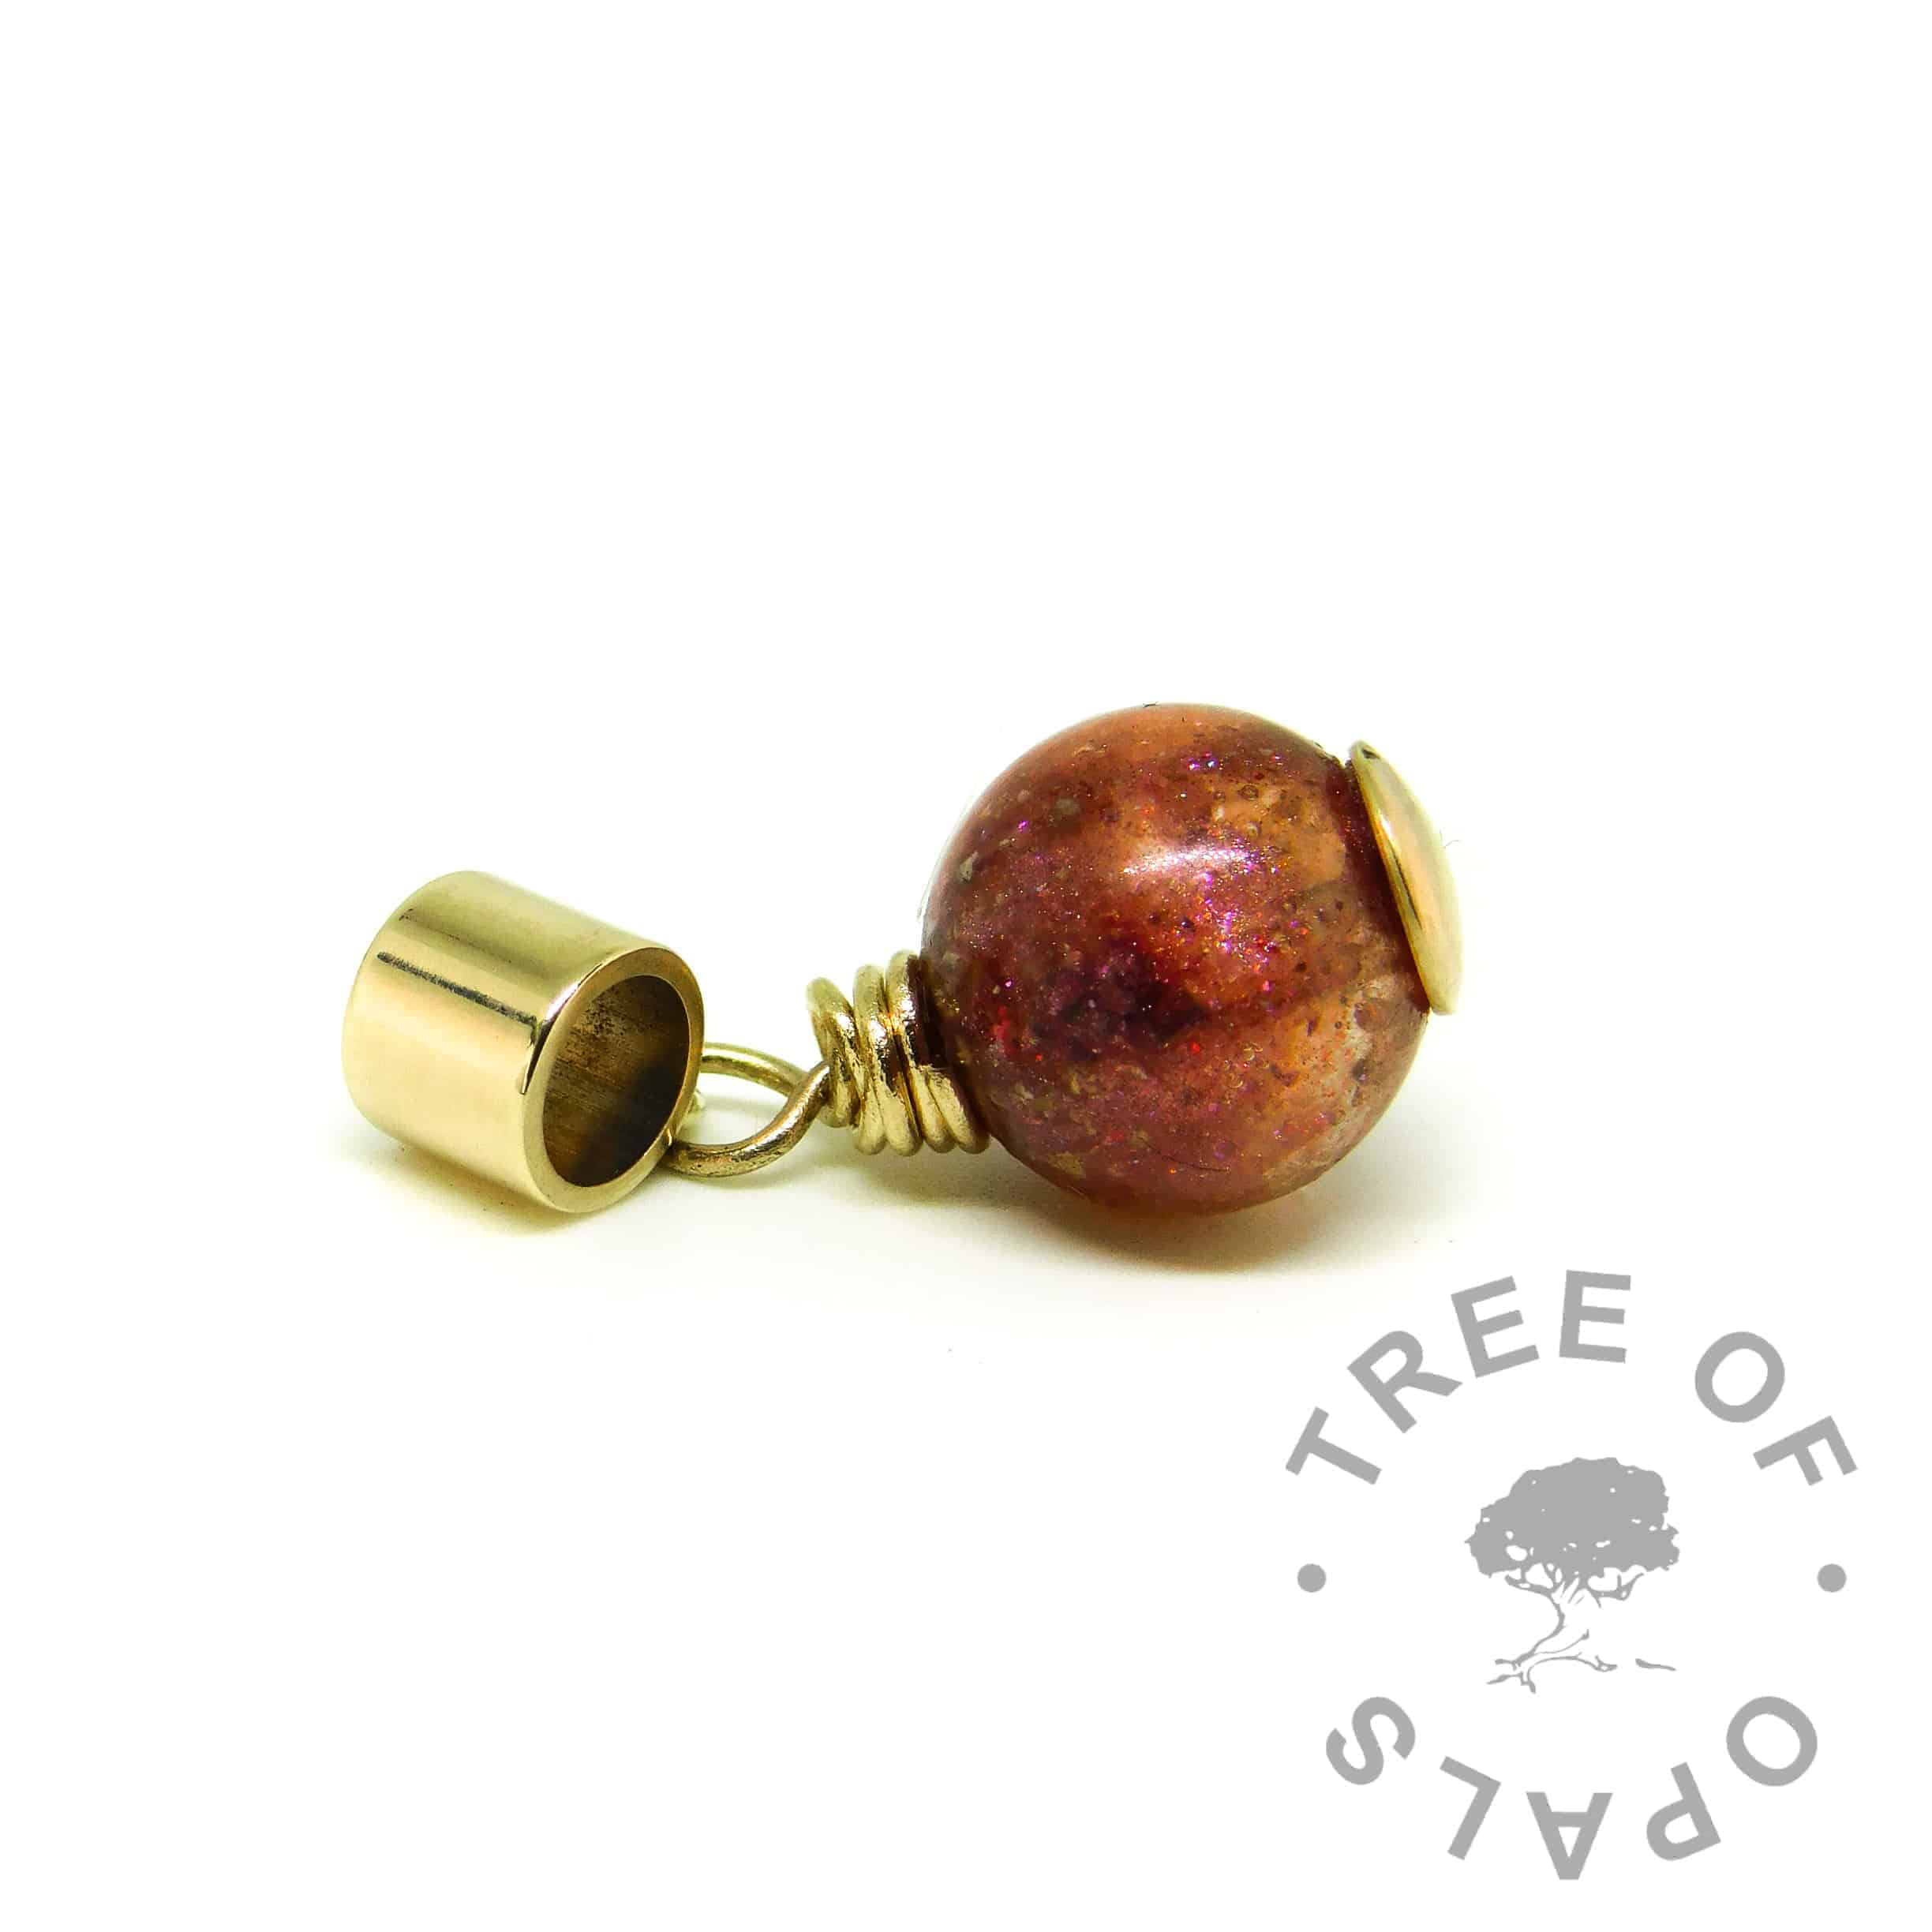 solid gold ashes charm, orb with solid 9ct gold wire wrapped setting for European bracelets like Pandora. Dragon's blood red resin sparkle mix